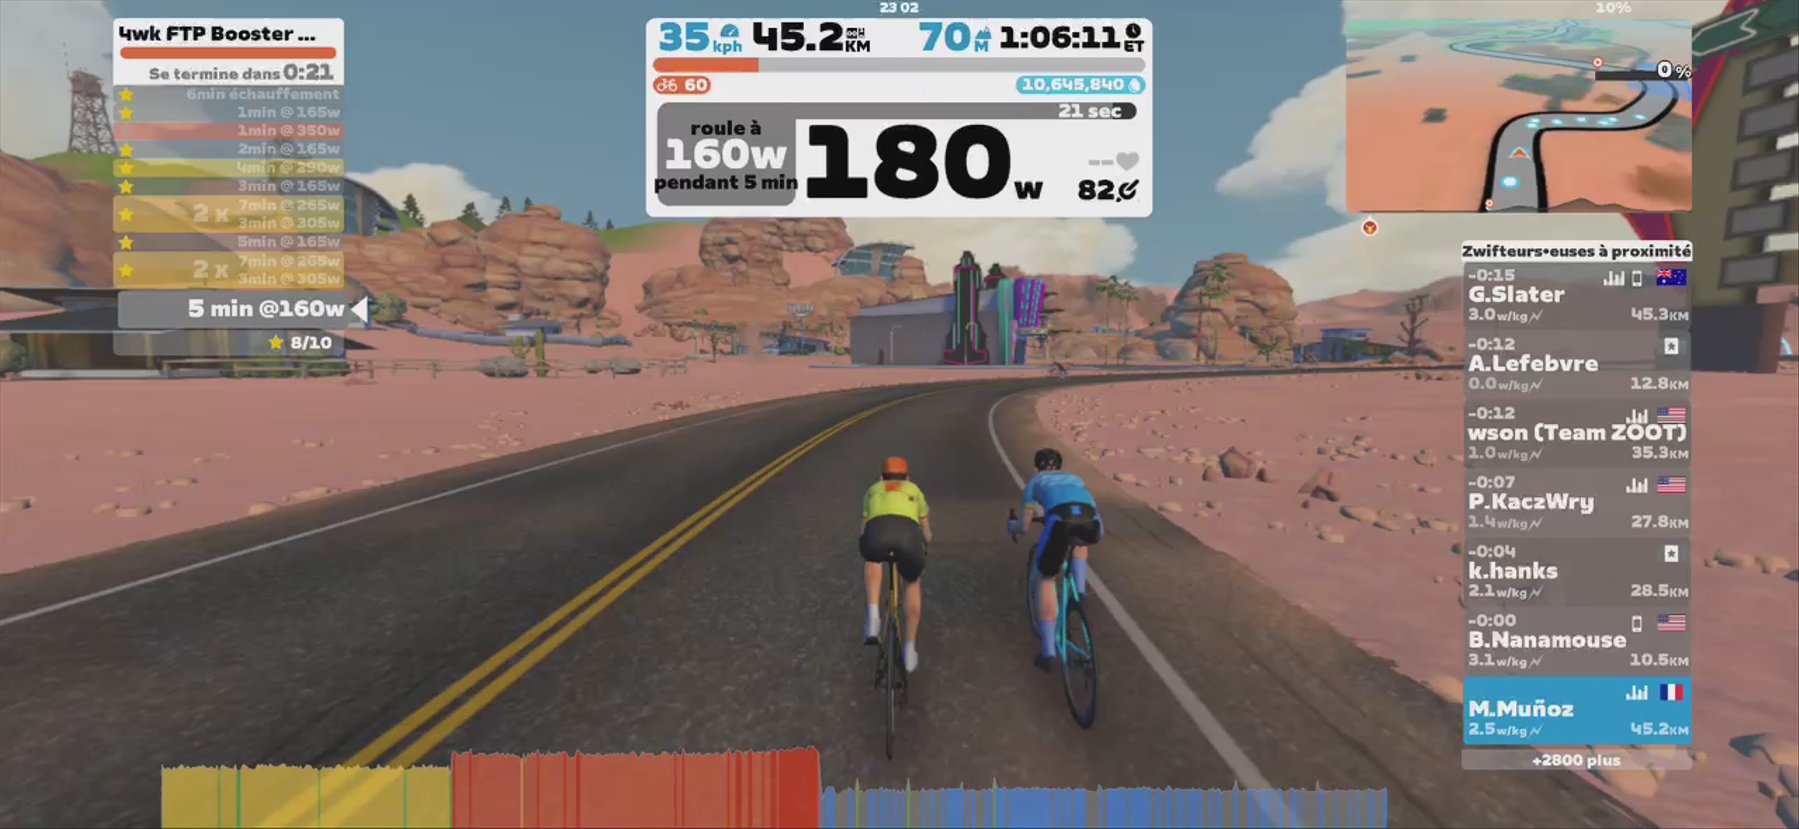 Zwift - 4wk FTP Booster S3#3 in Watopia